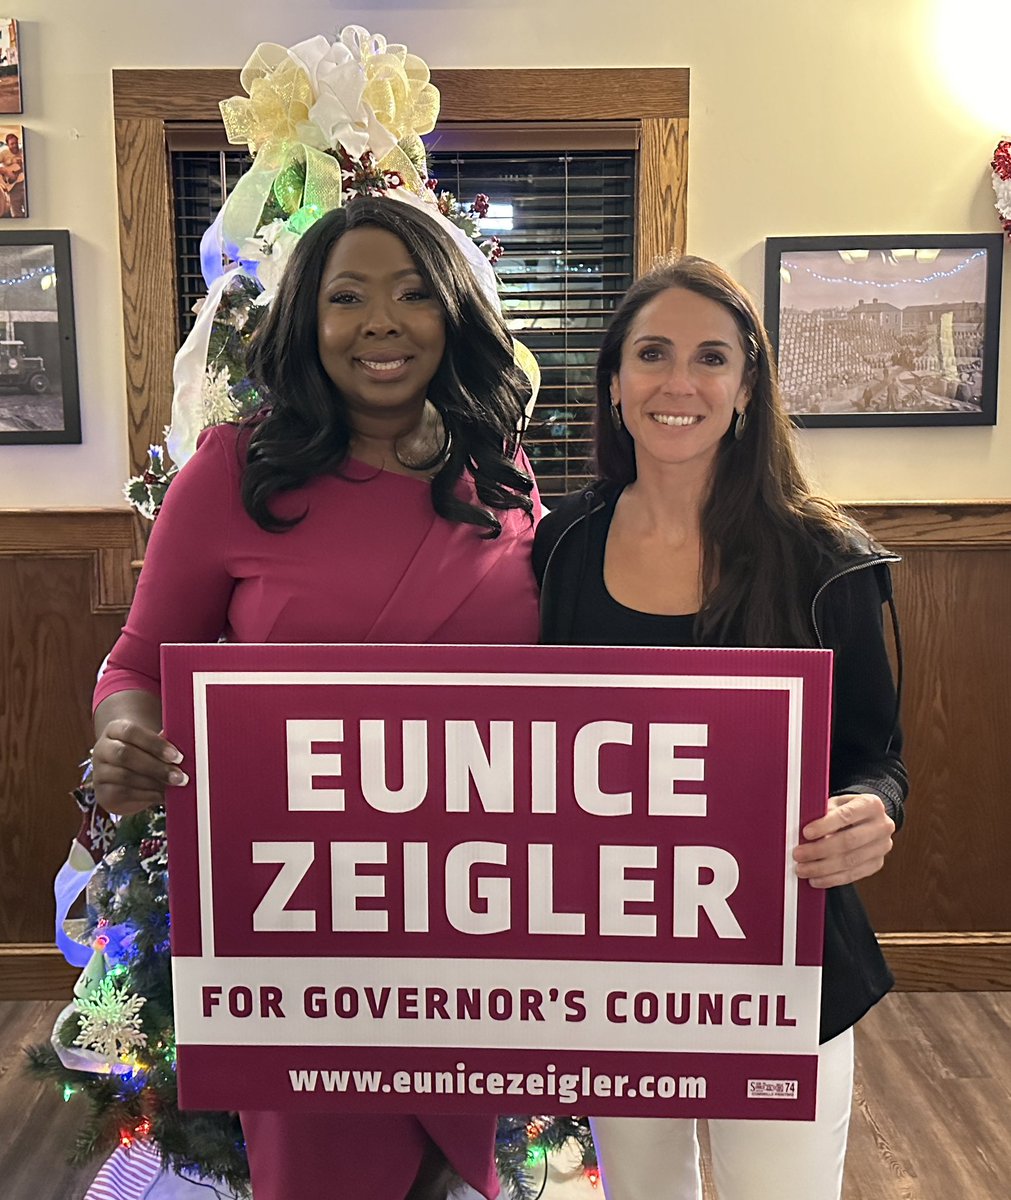 So happy to support @EuniceZeigler for Governor’s Council! She will be a strong voice on the council representing everyone in the fifth district. #mapoli